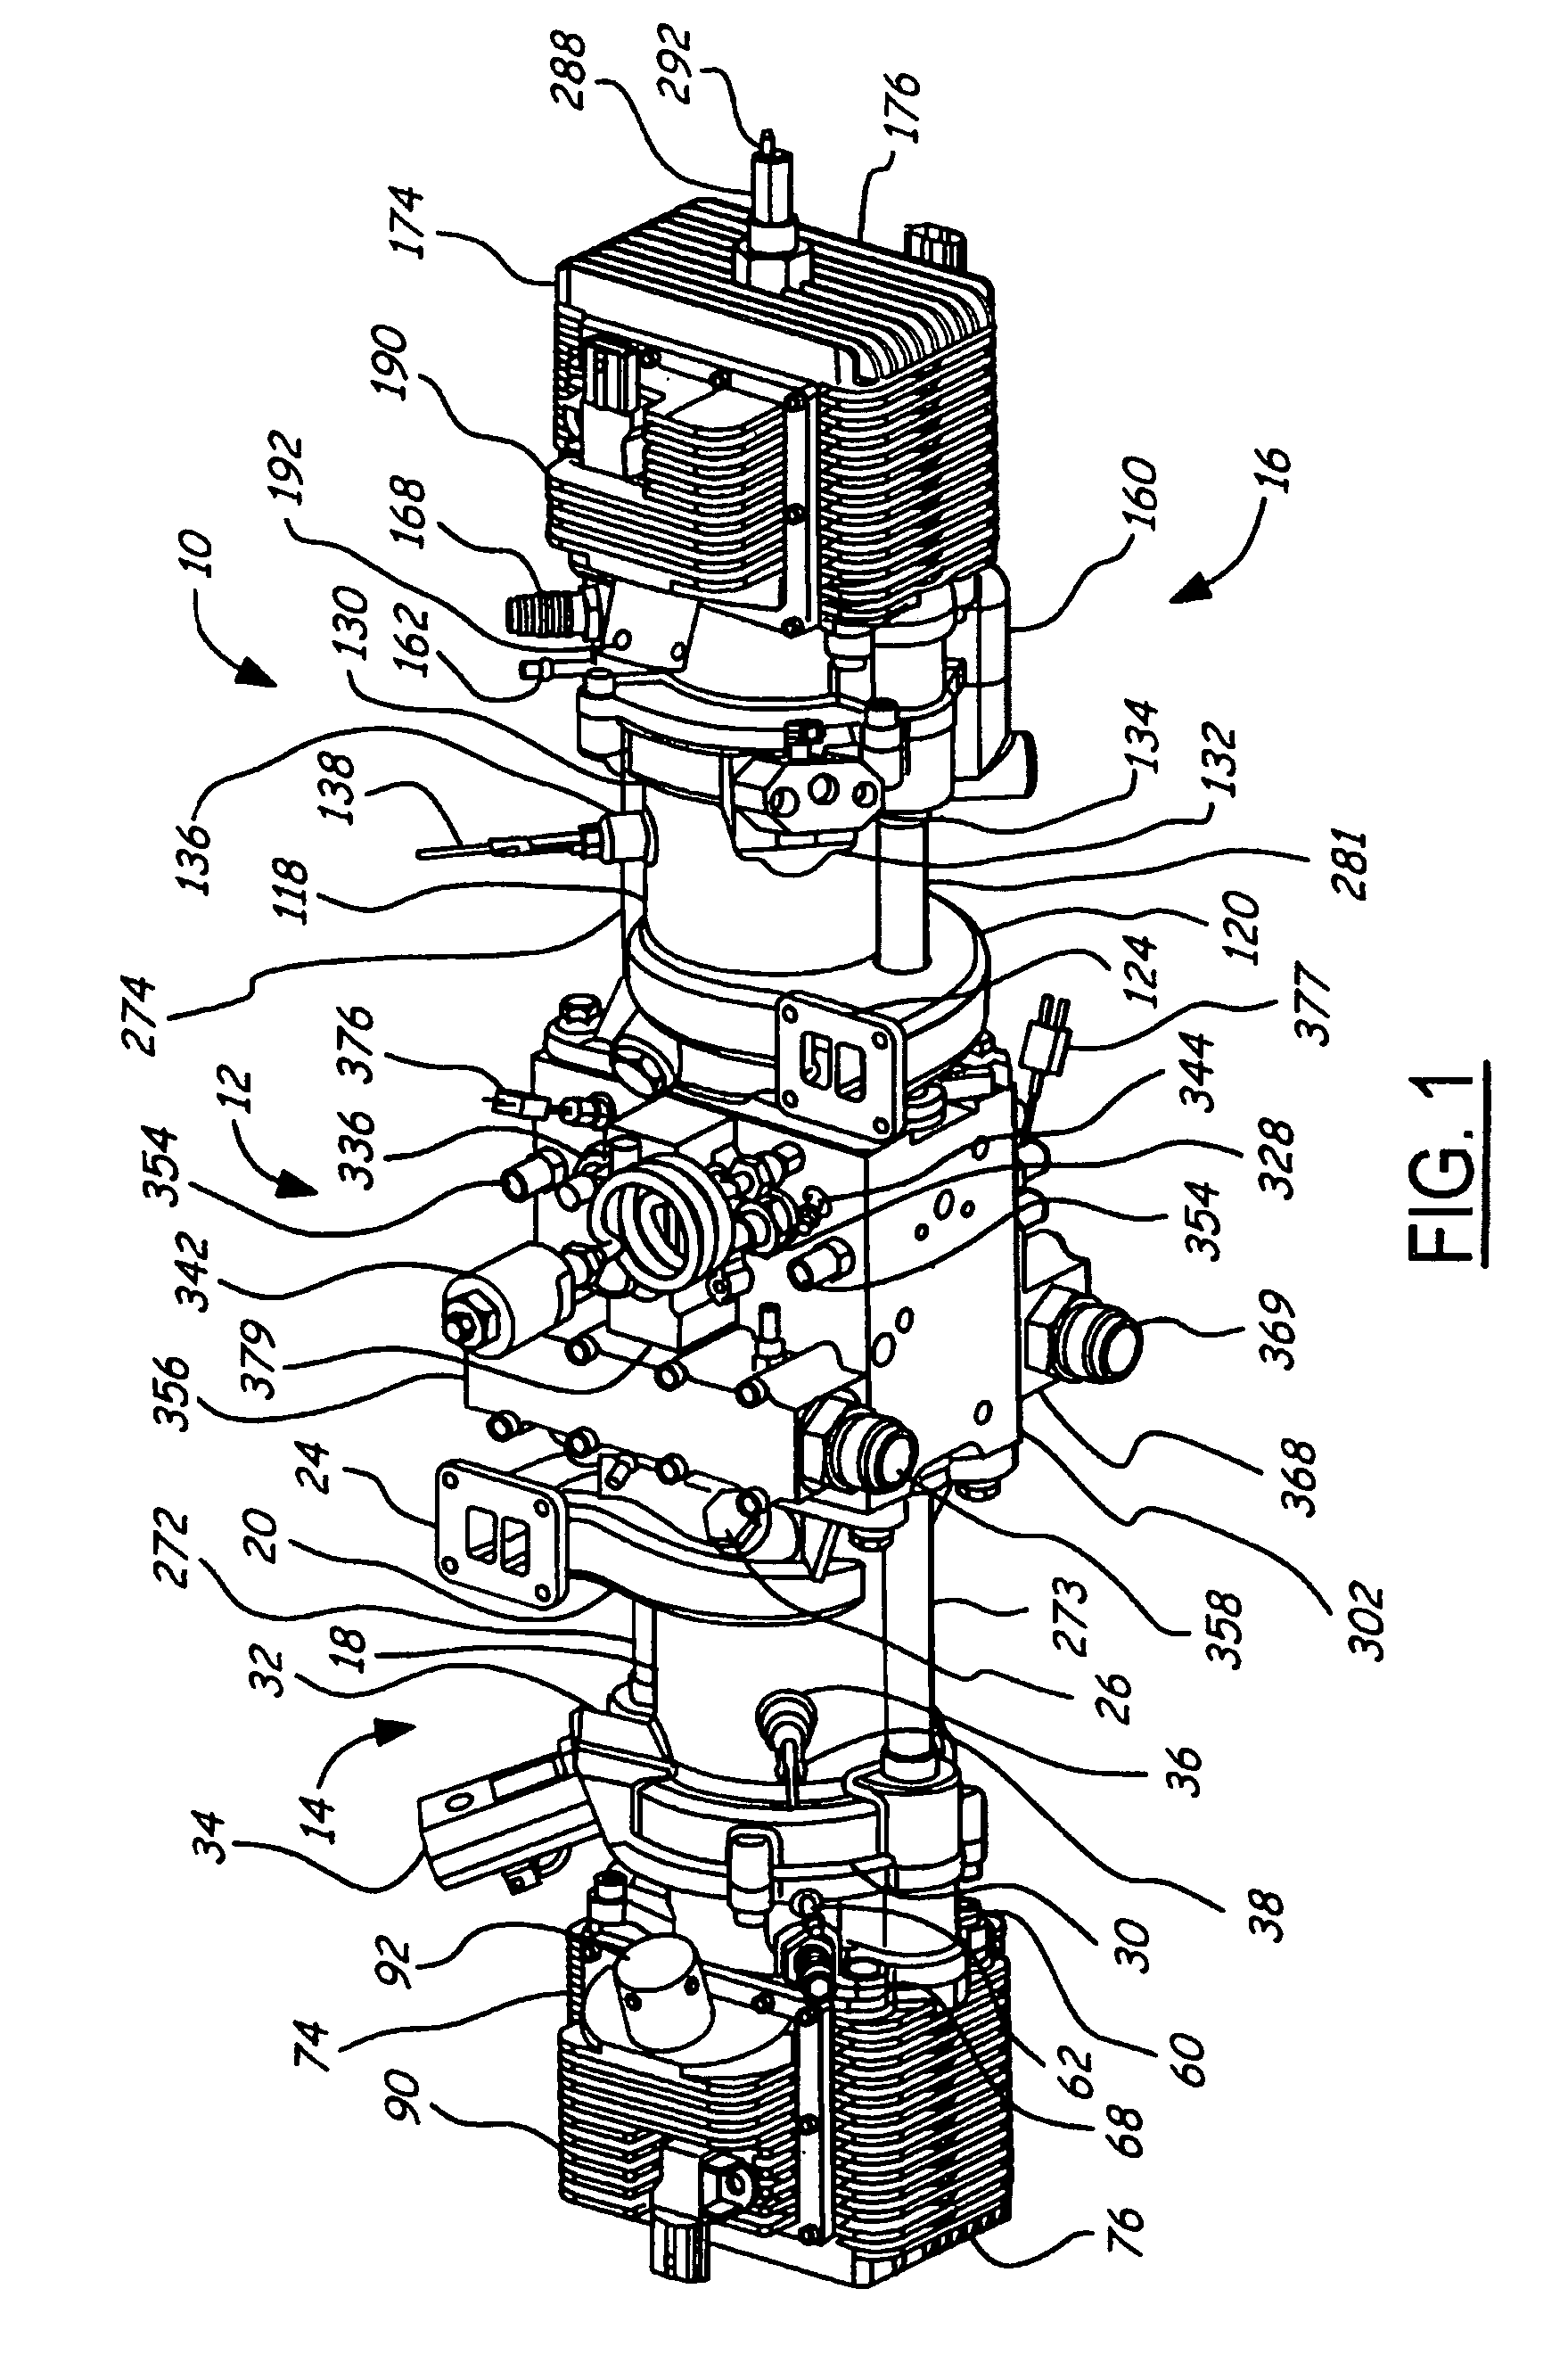 Air scavenging for an opposed piston opposed cylinder free piston engine